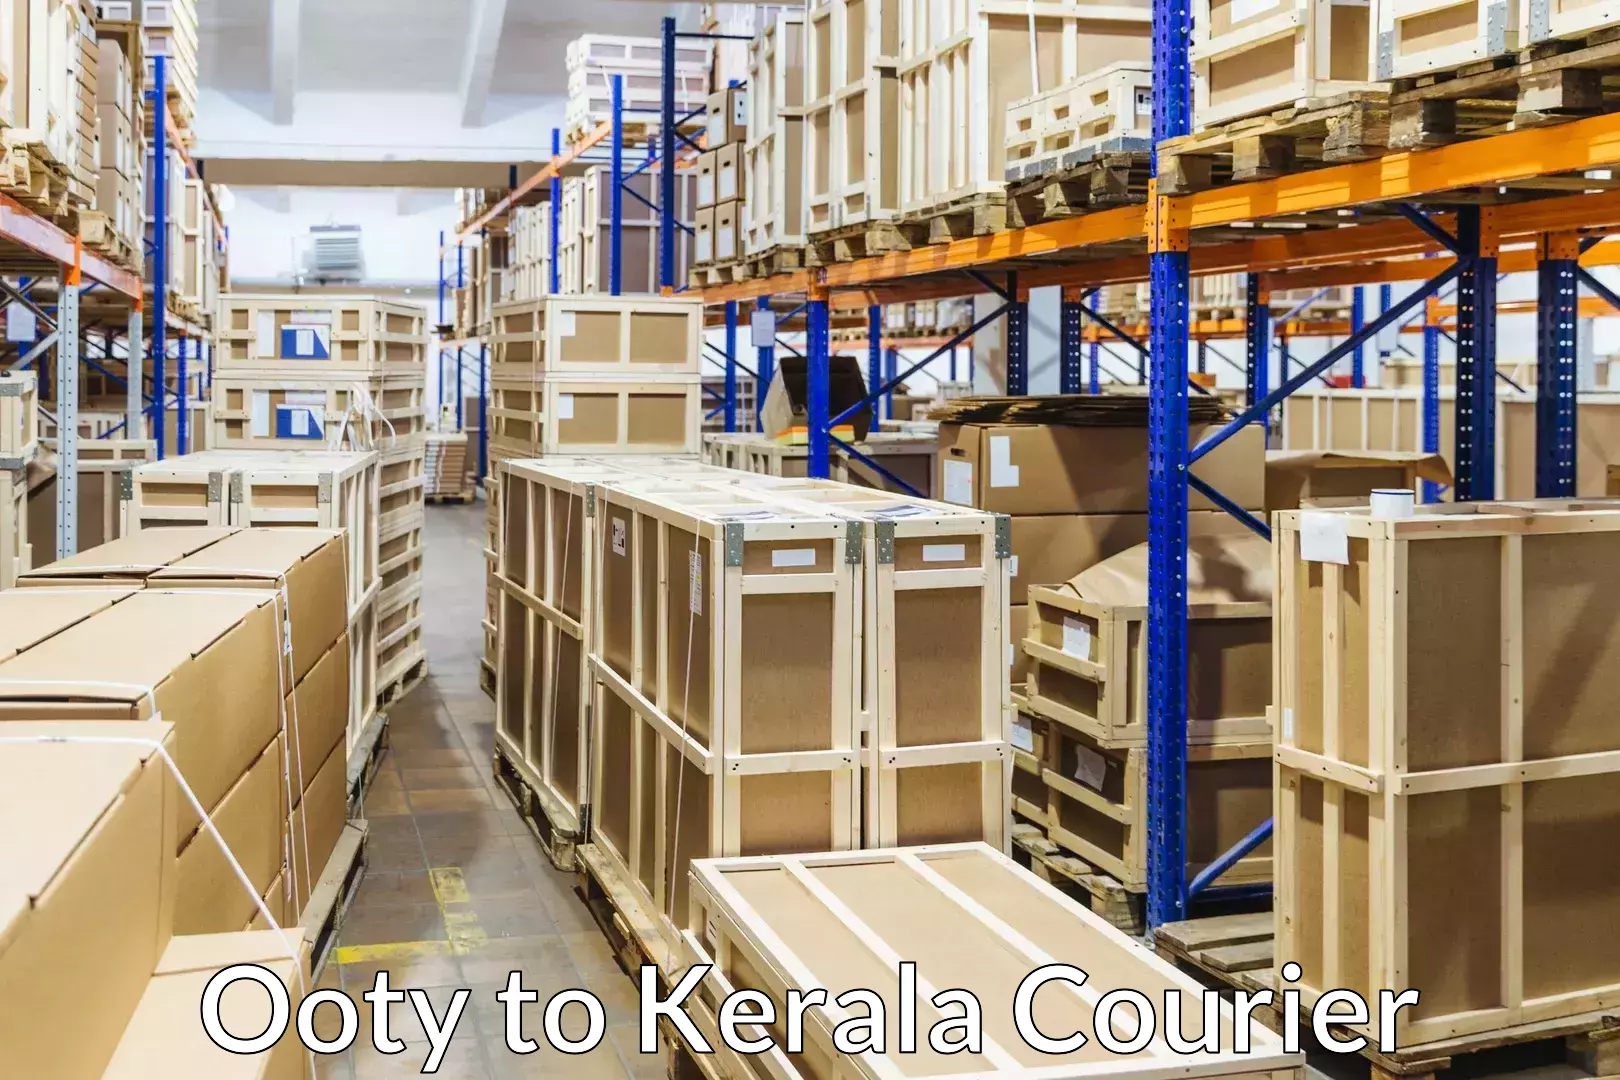 Furniture transport specialists Ooty to Parippally